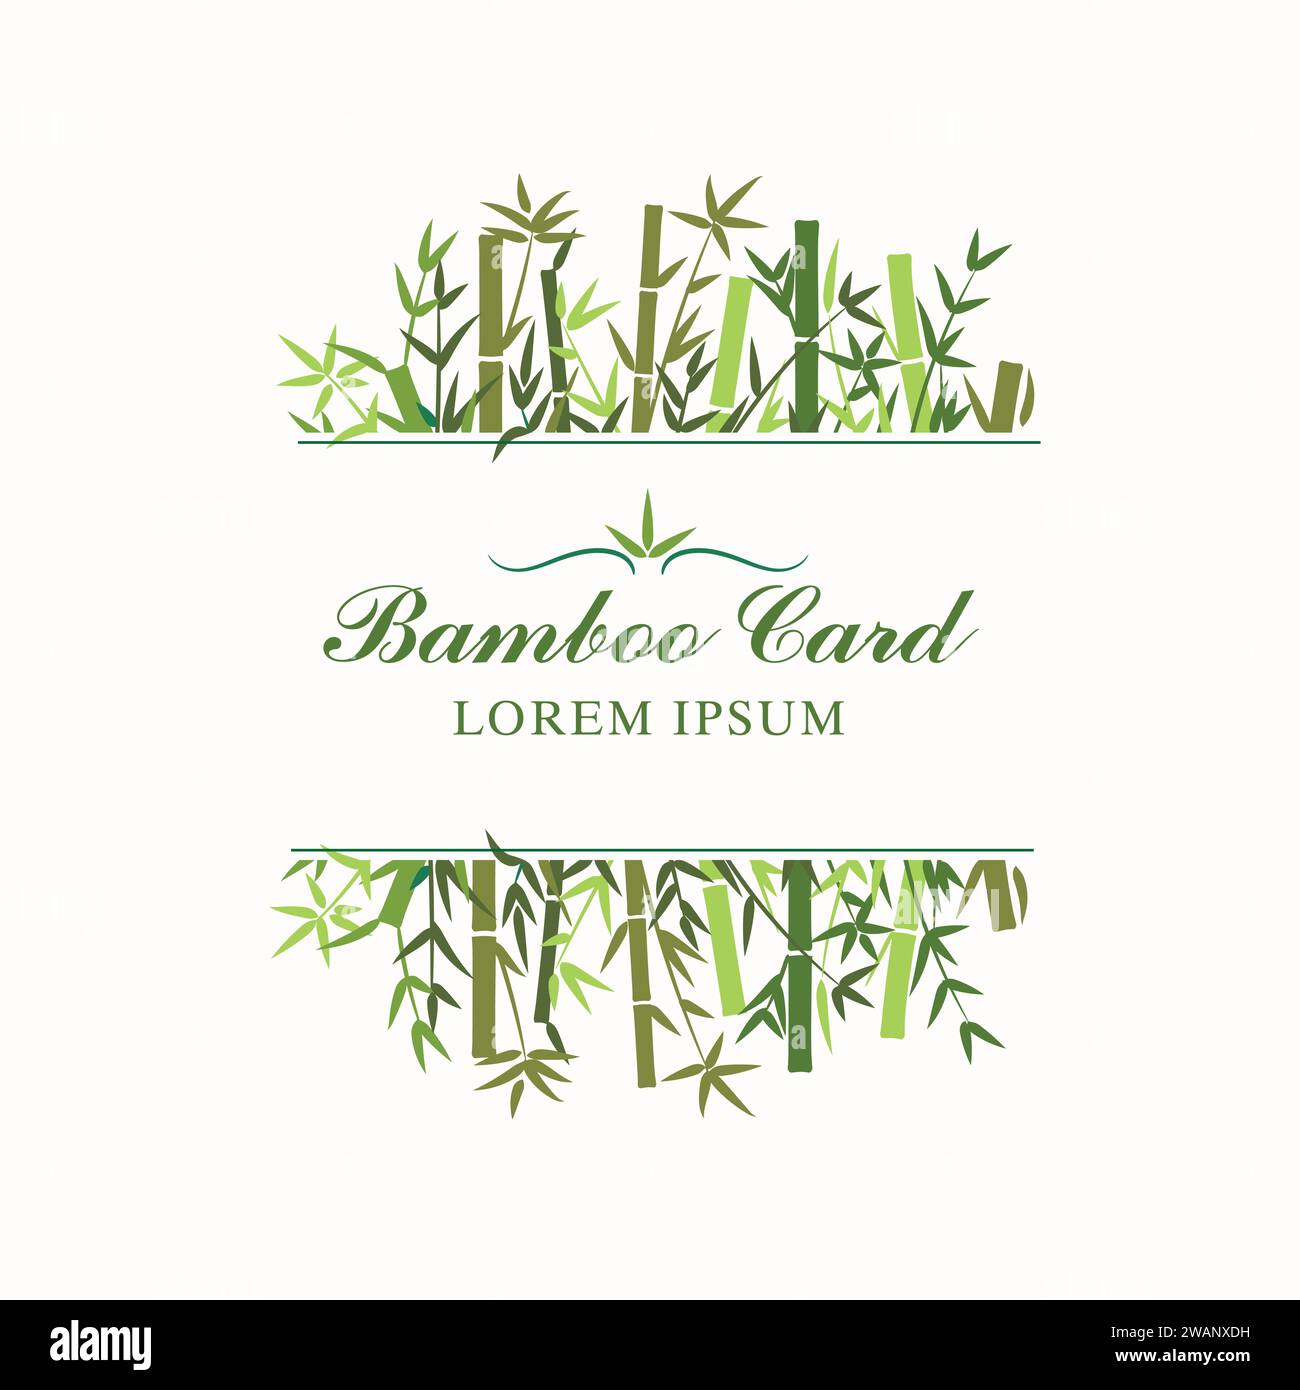 Bamboo tree greeting card background vector illustration Stock Vector